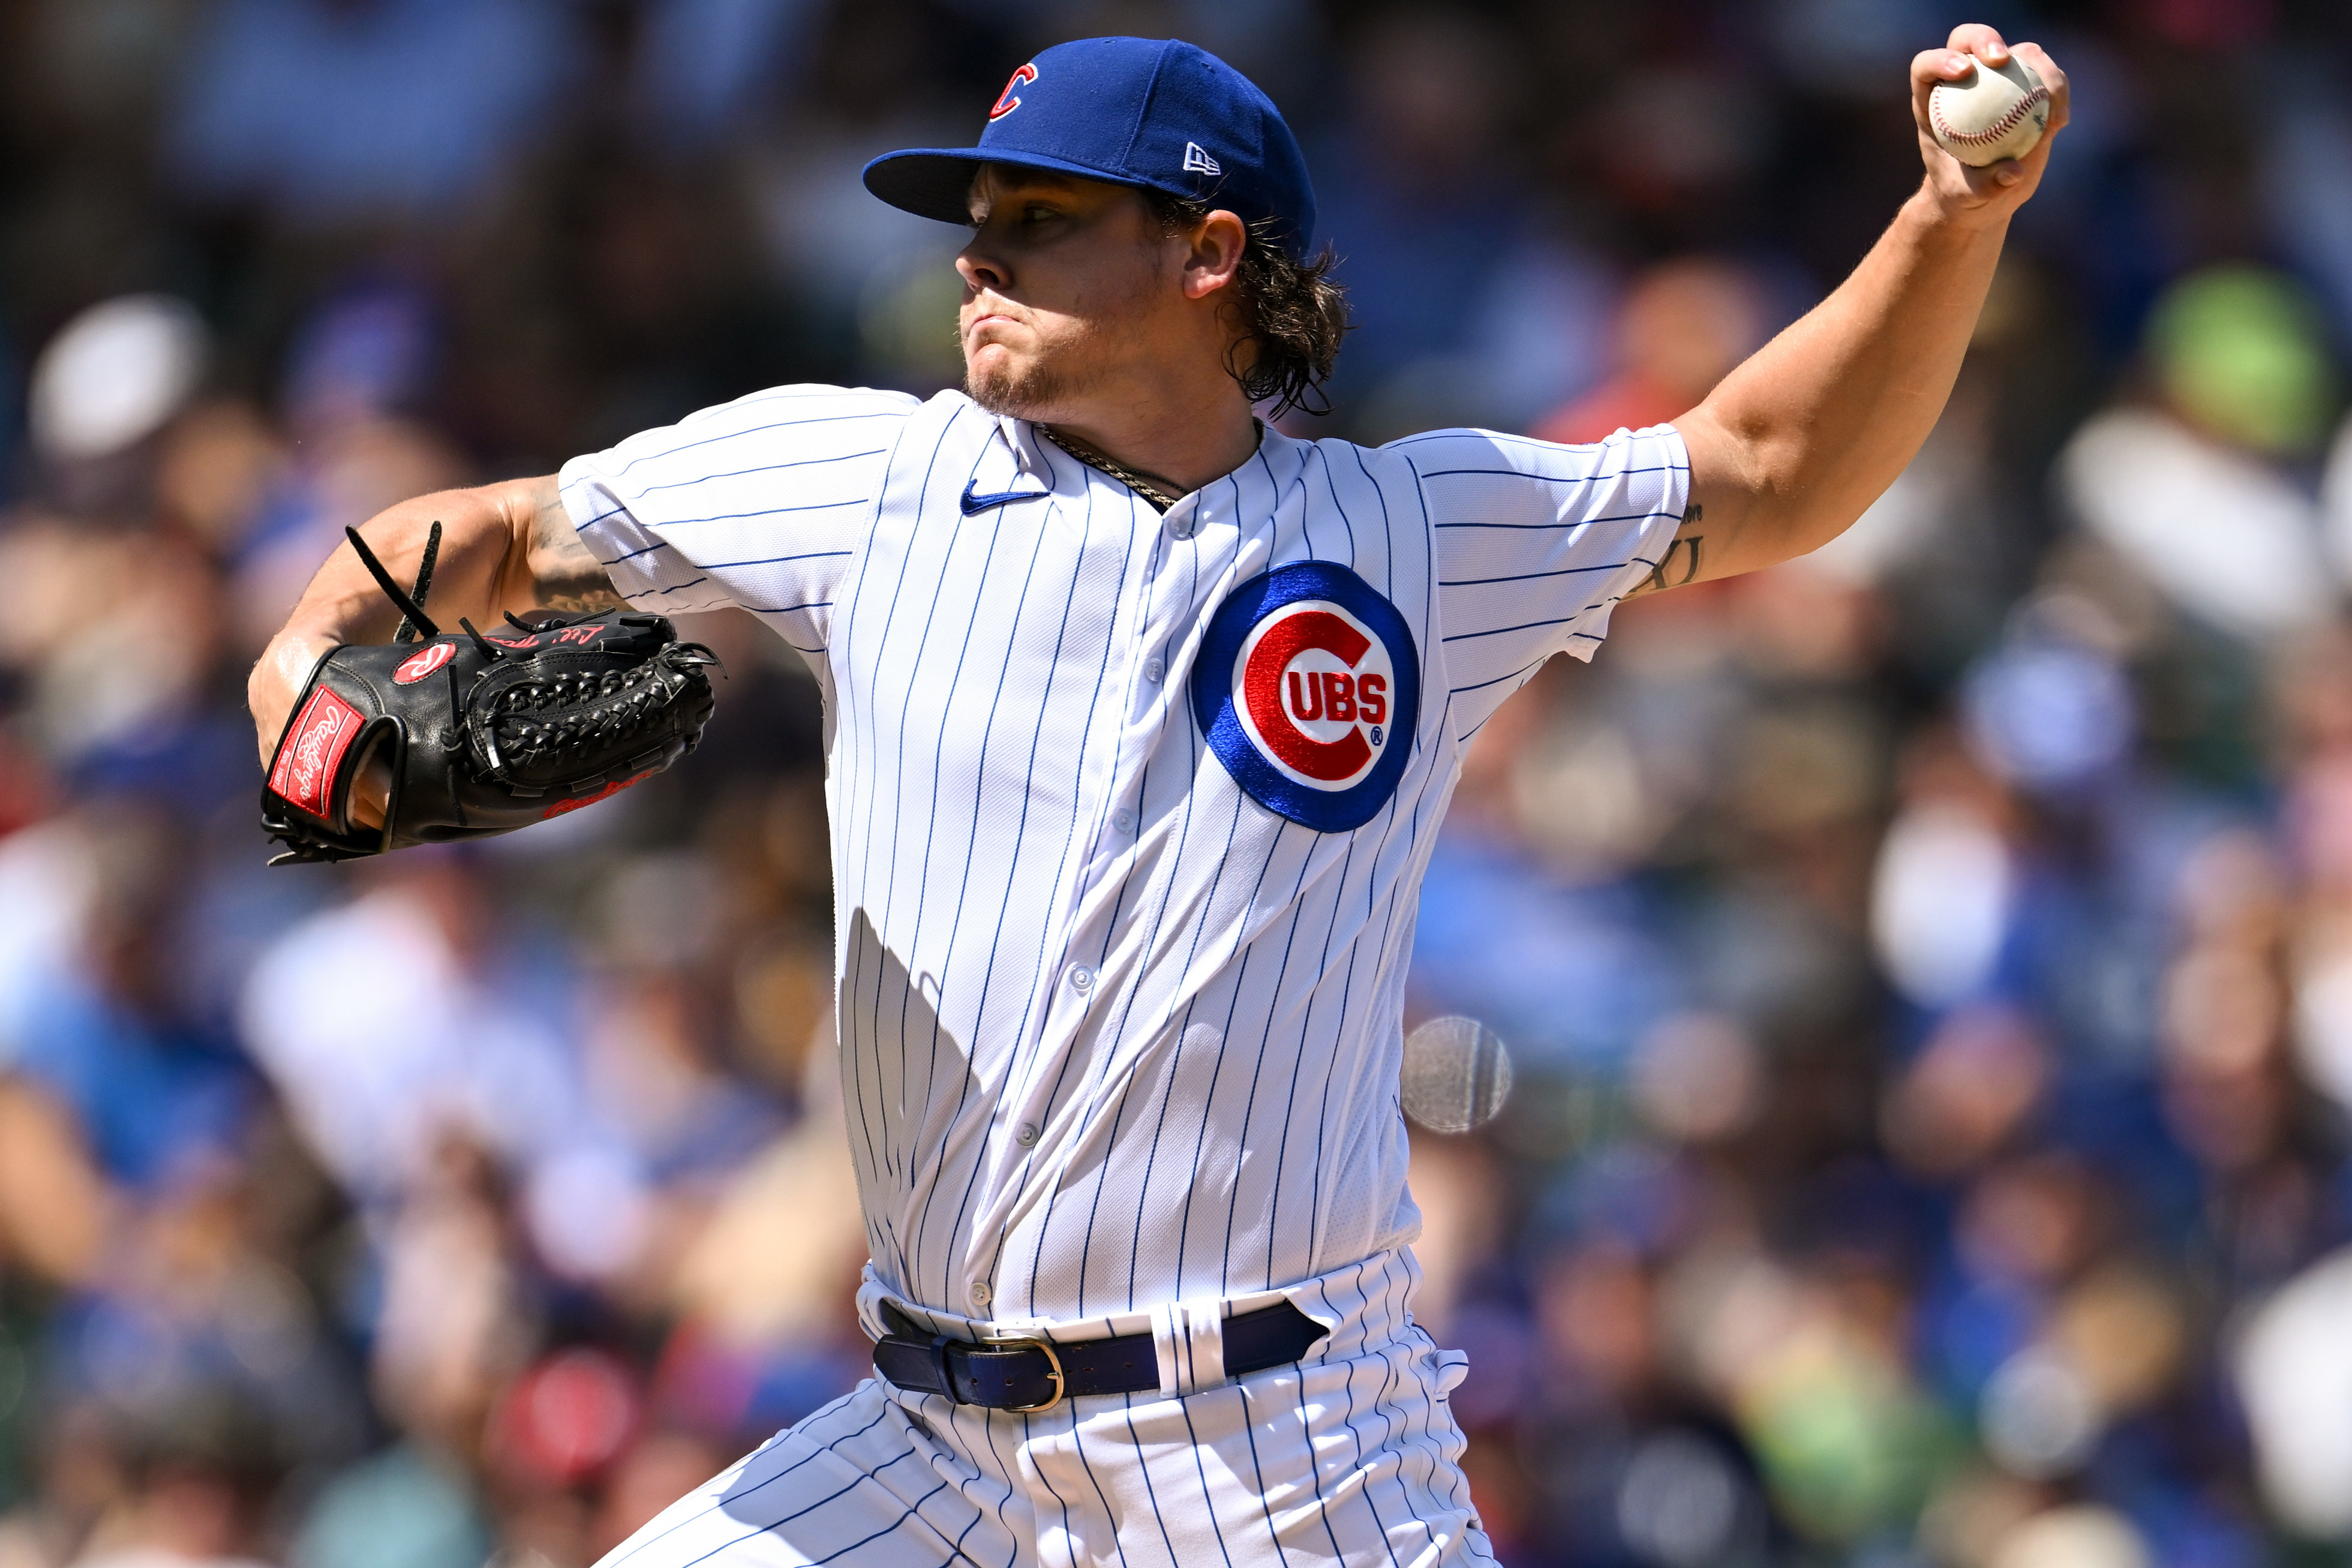 With Yu Darvish entering disaster territory for the Cubs, is there